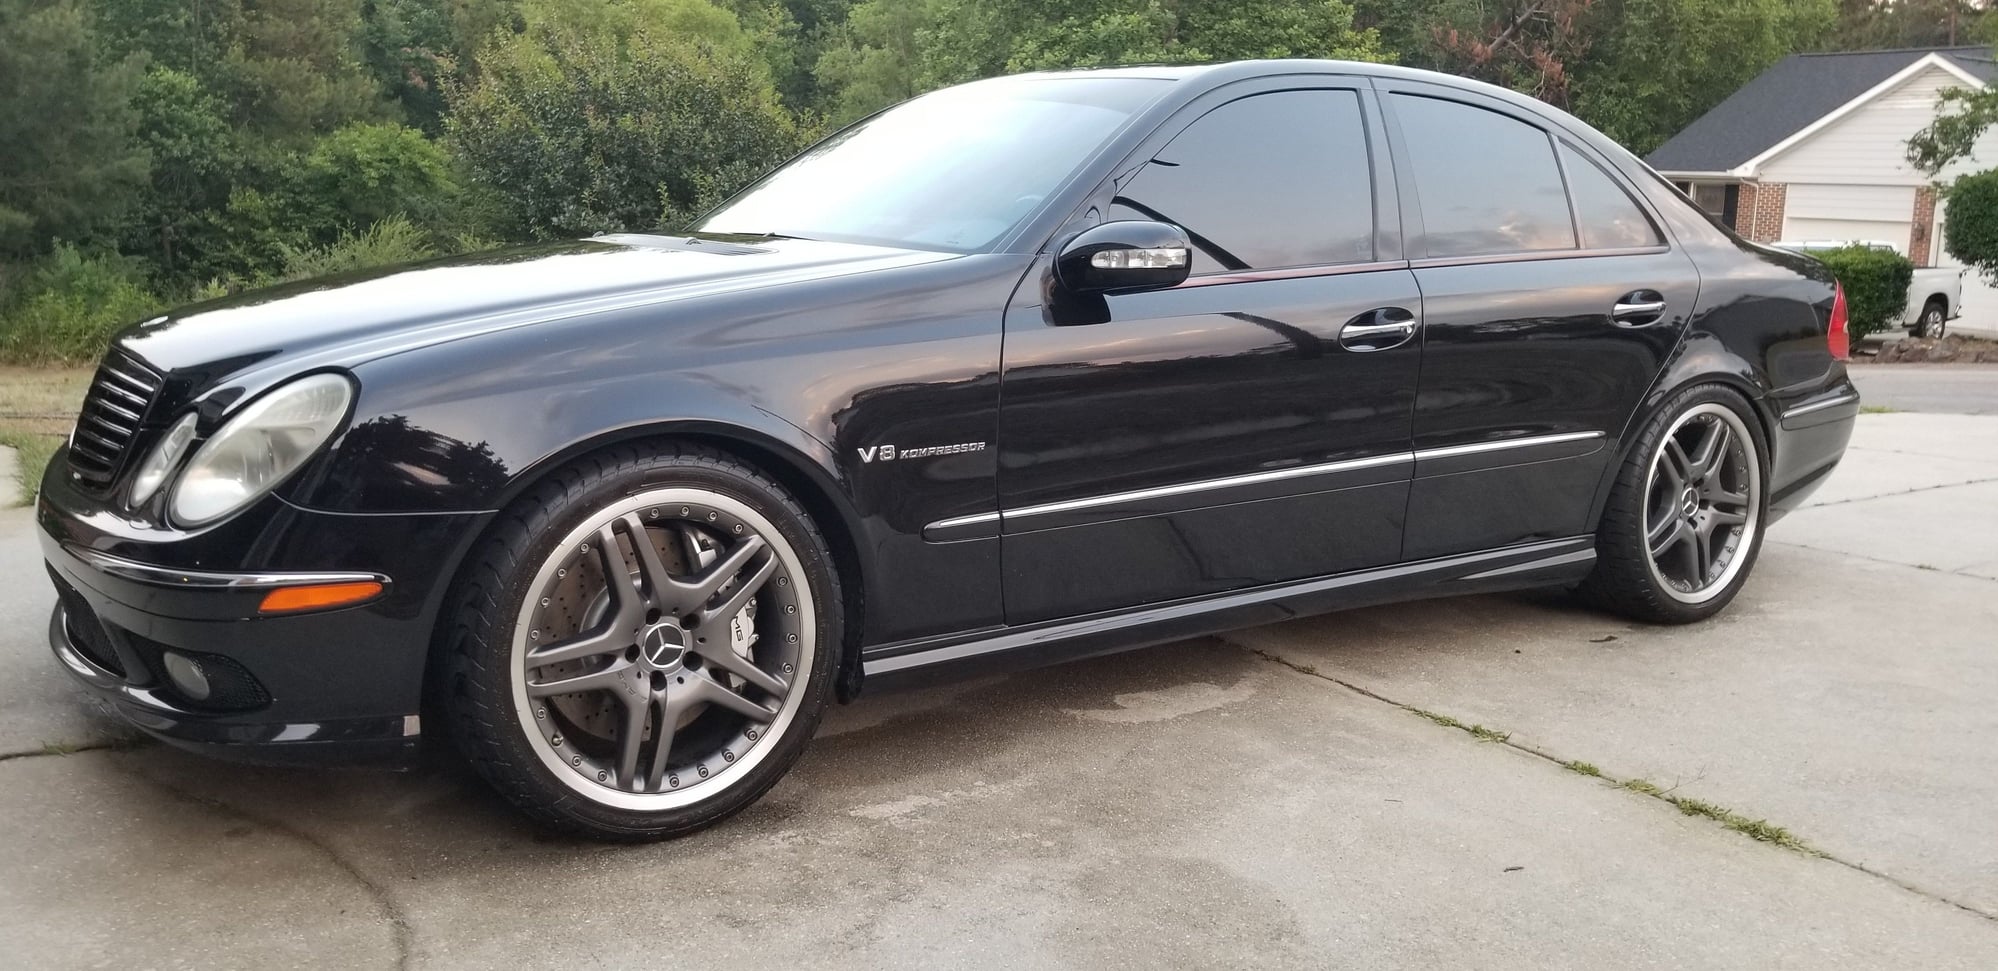 Wheels and Tires/Axles - SL65 wheels - Used - 2003 to 2006 Mercedes-Benz SL65 AMG - 2003 to 2007 Mercedes-Benz E55 AMG - Fayetteville, NC 28304, United States